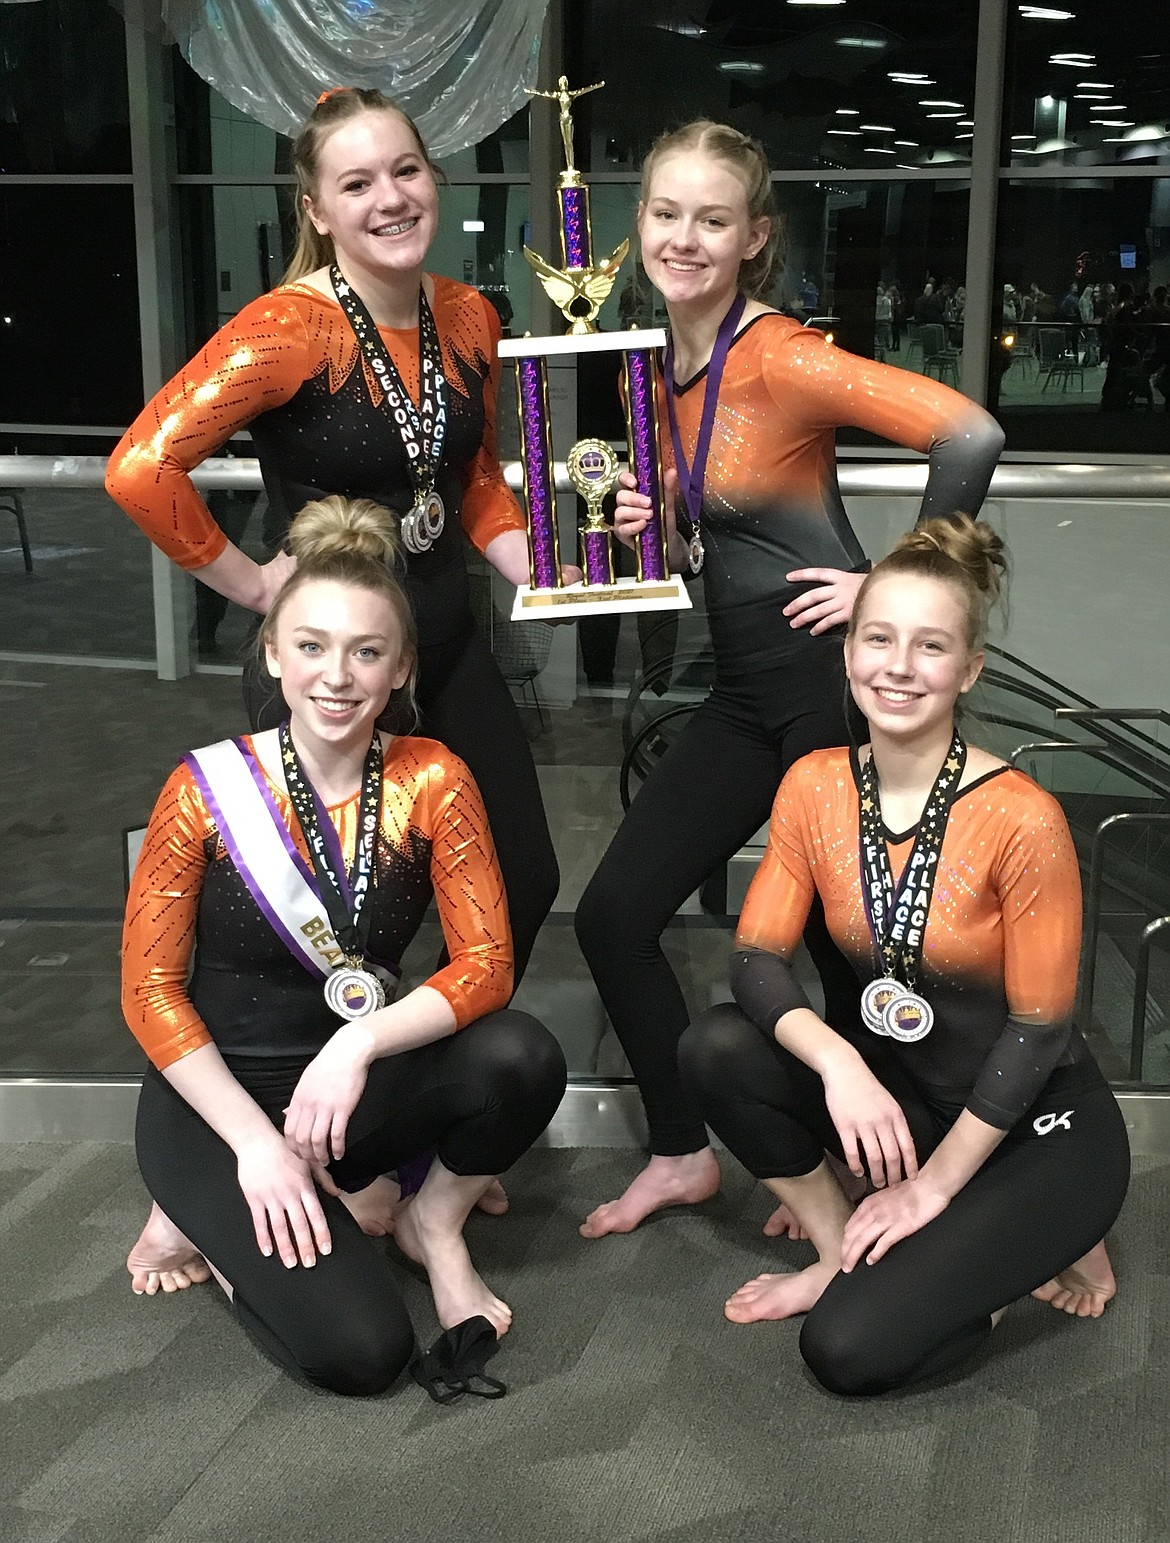 Courtesy photo
North Idaho Gymnastics Xcel Platinum took first place team at the Royal Festival at the Spokane Convention Center March 6-7. In the front row from left are Taryn Olson and Alyssa Caywood; and back row from left, Dakota Caudle and Kelsie Geissinger.